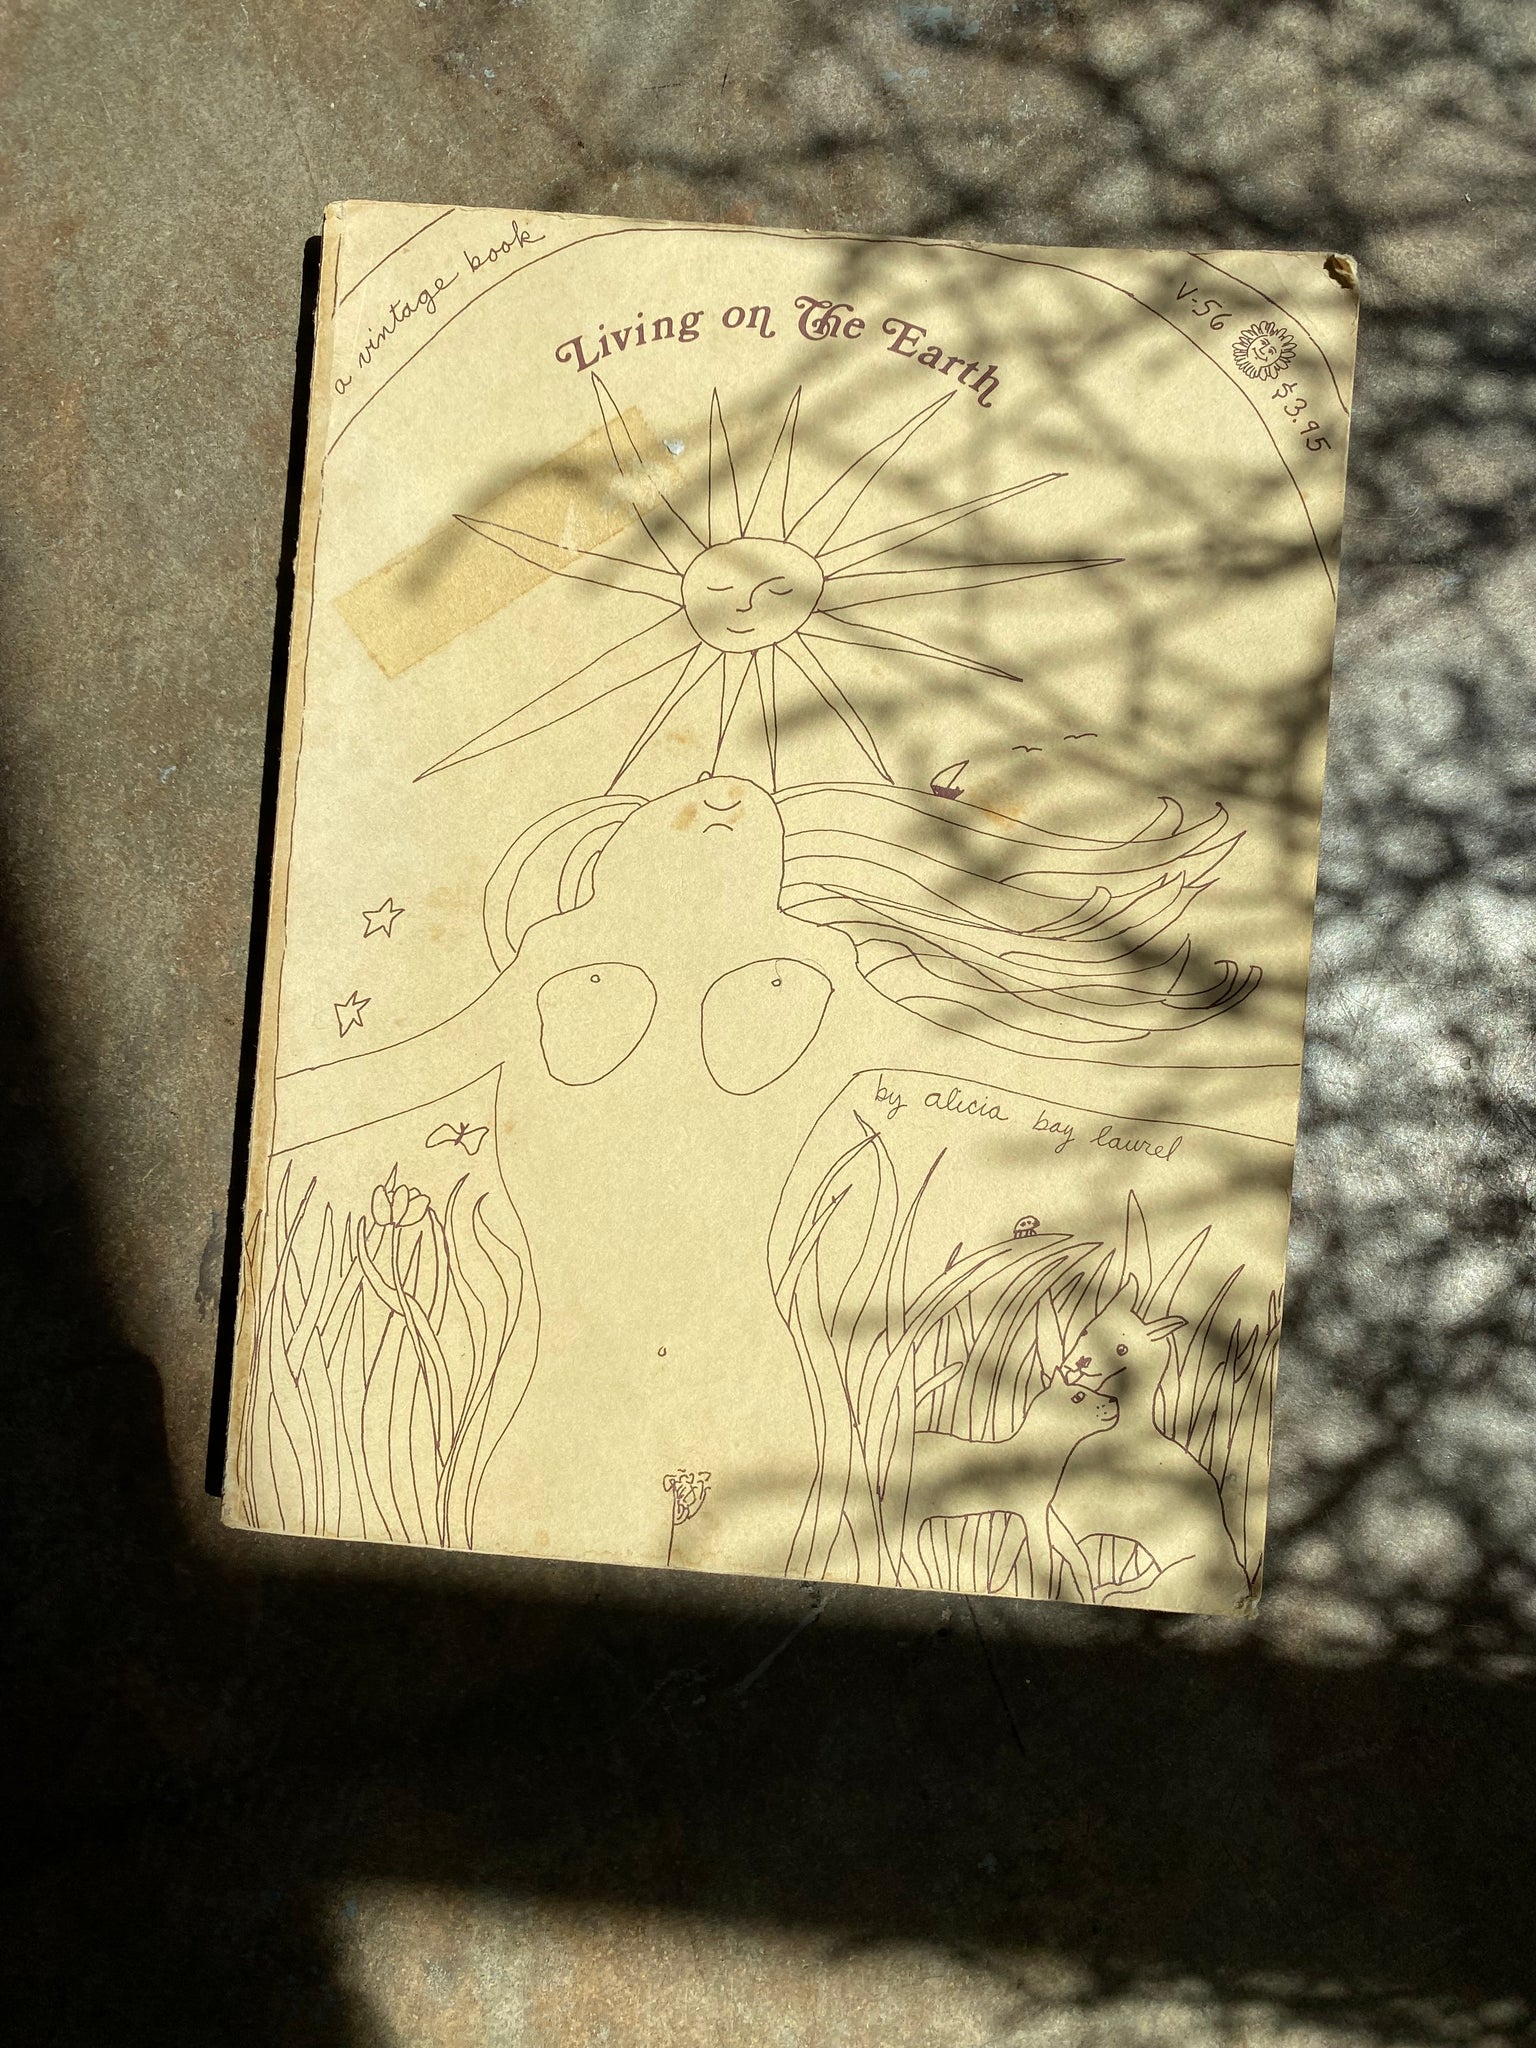 First Edition 1971 "Living on the Earth"